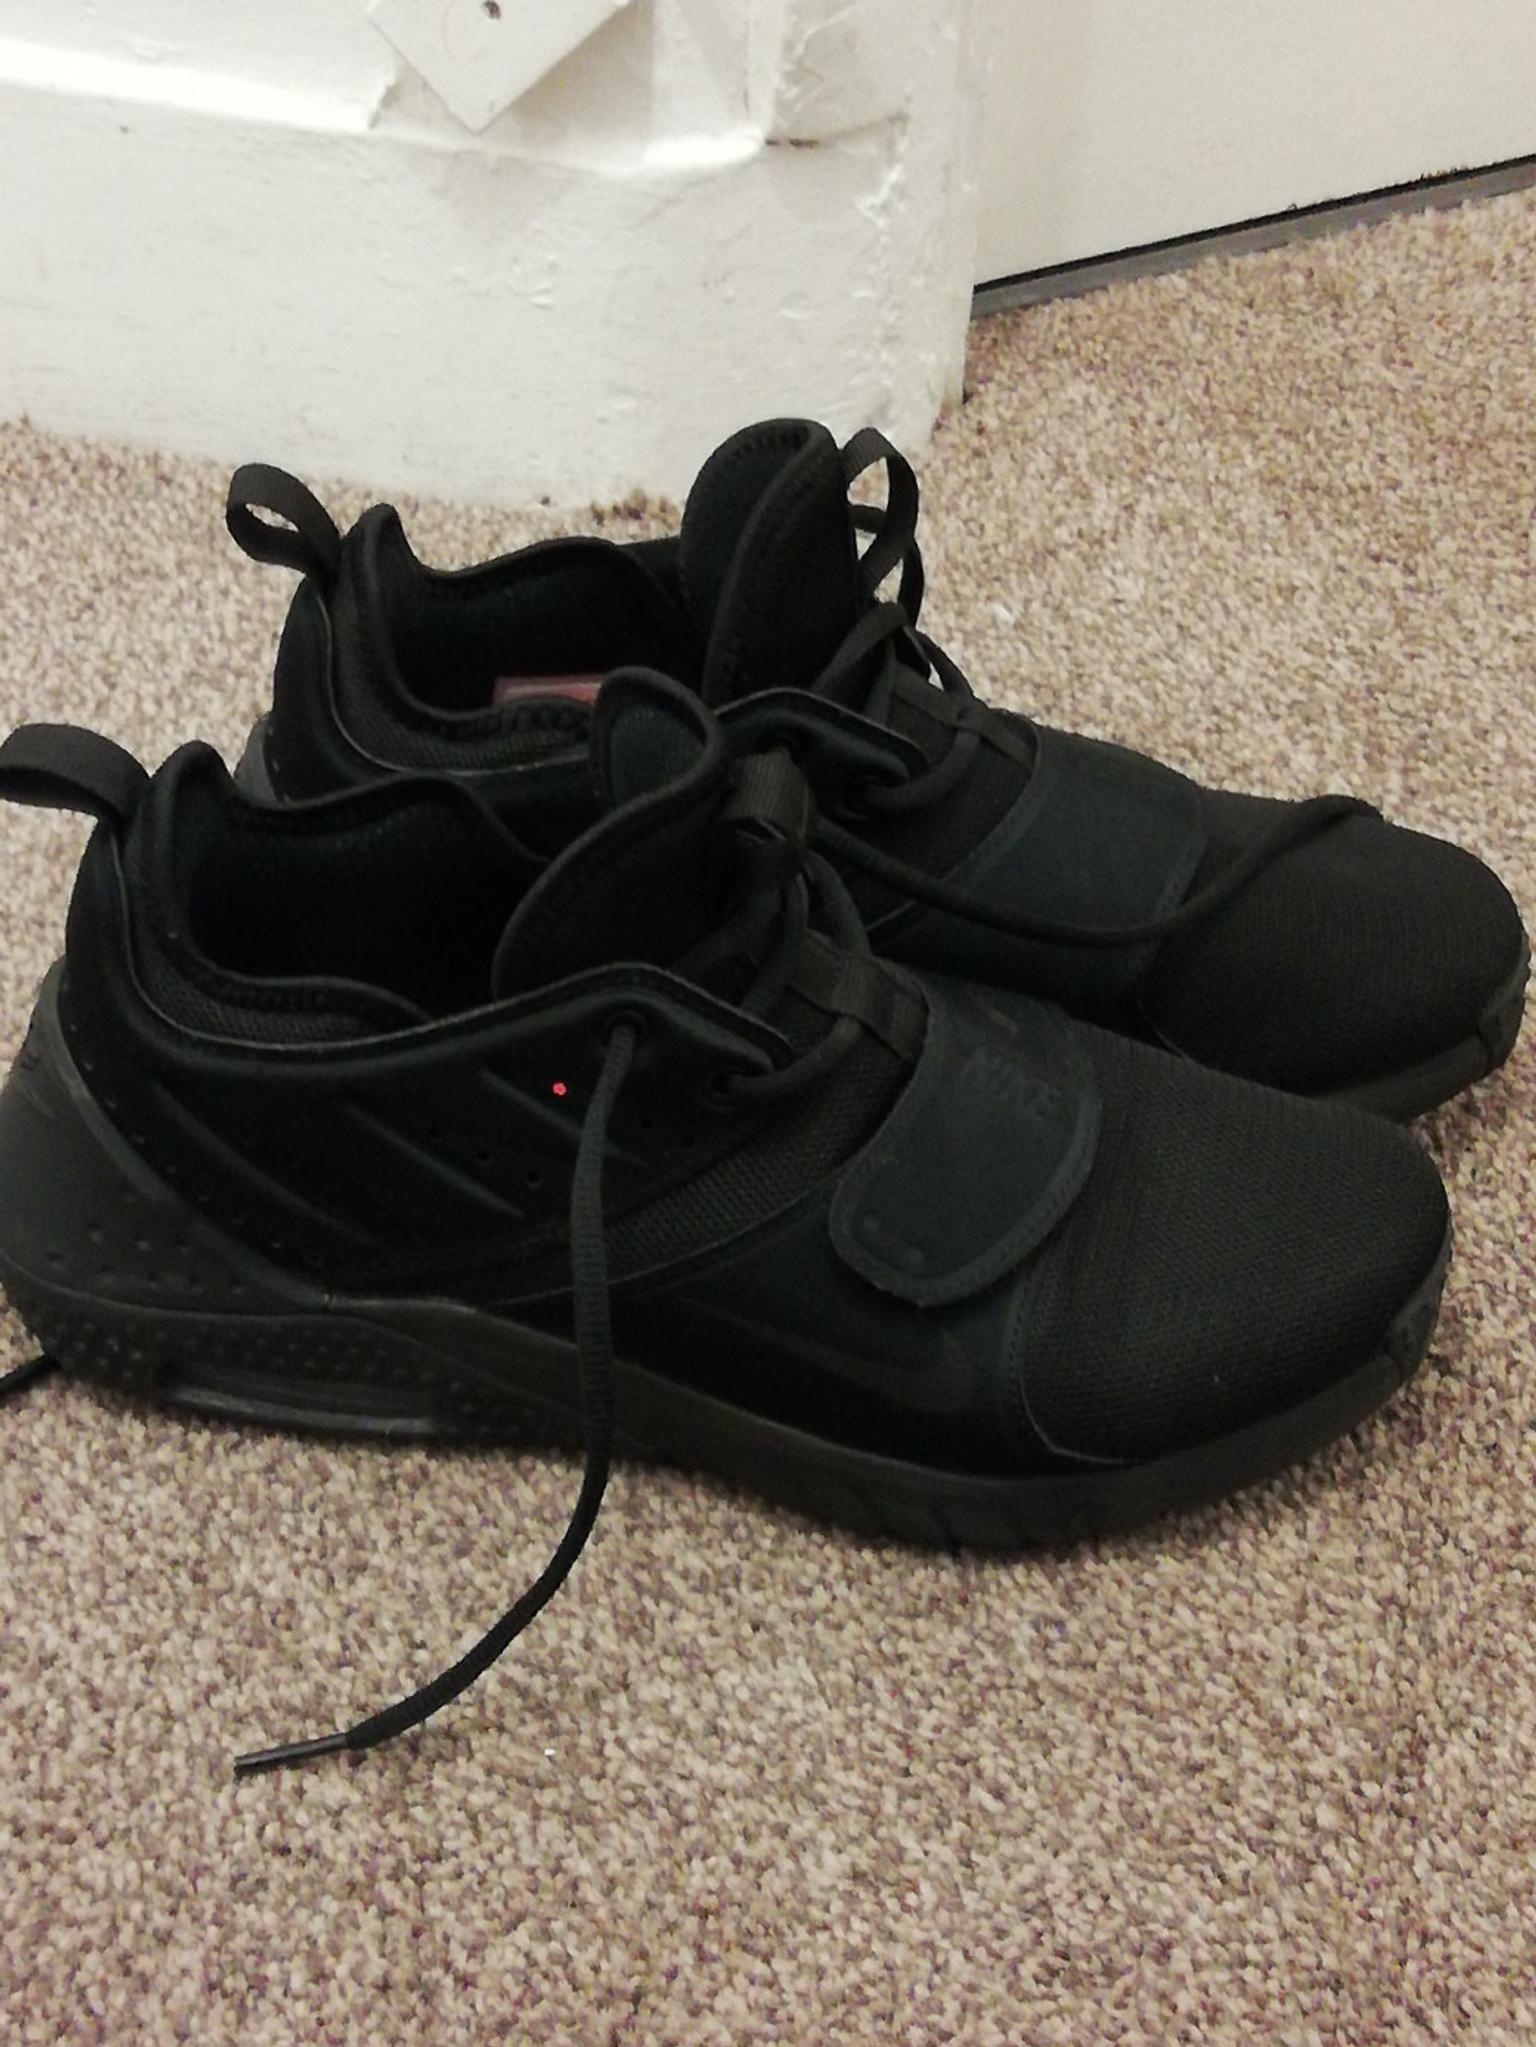 size 6.5 nike trainers